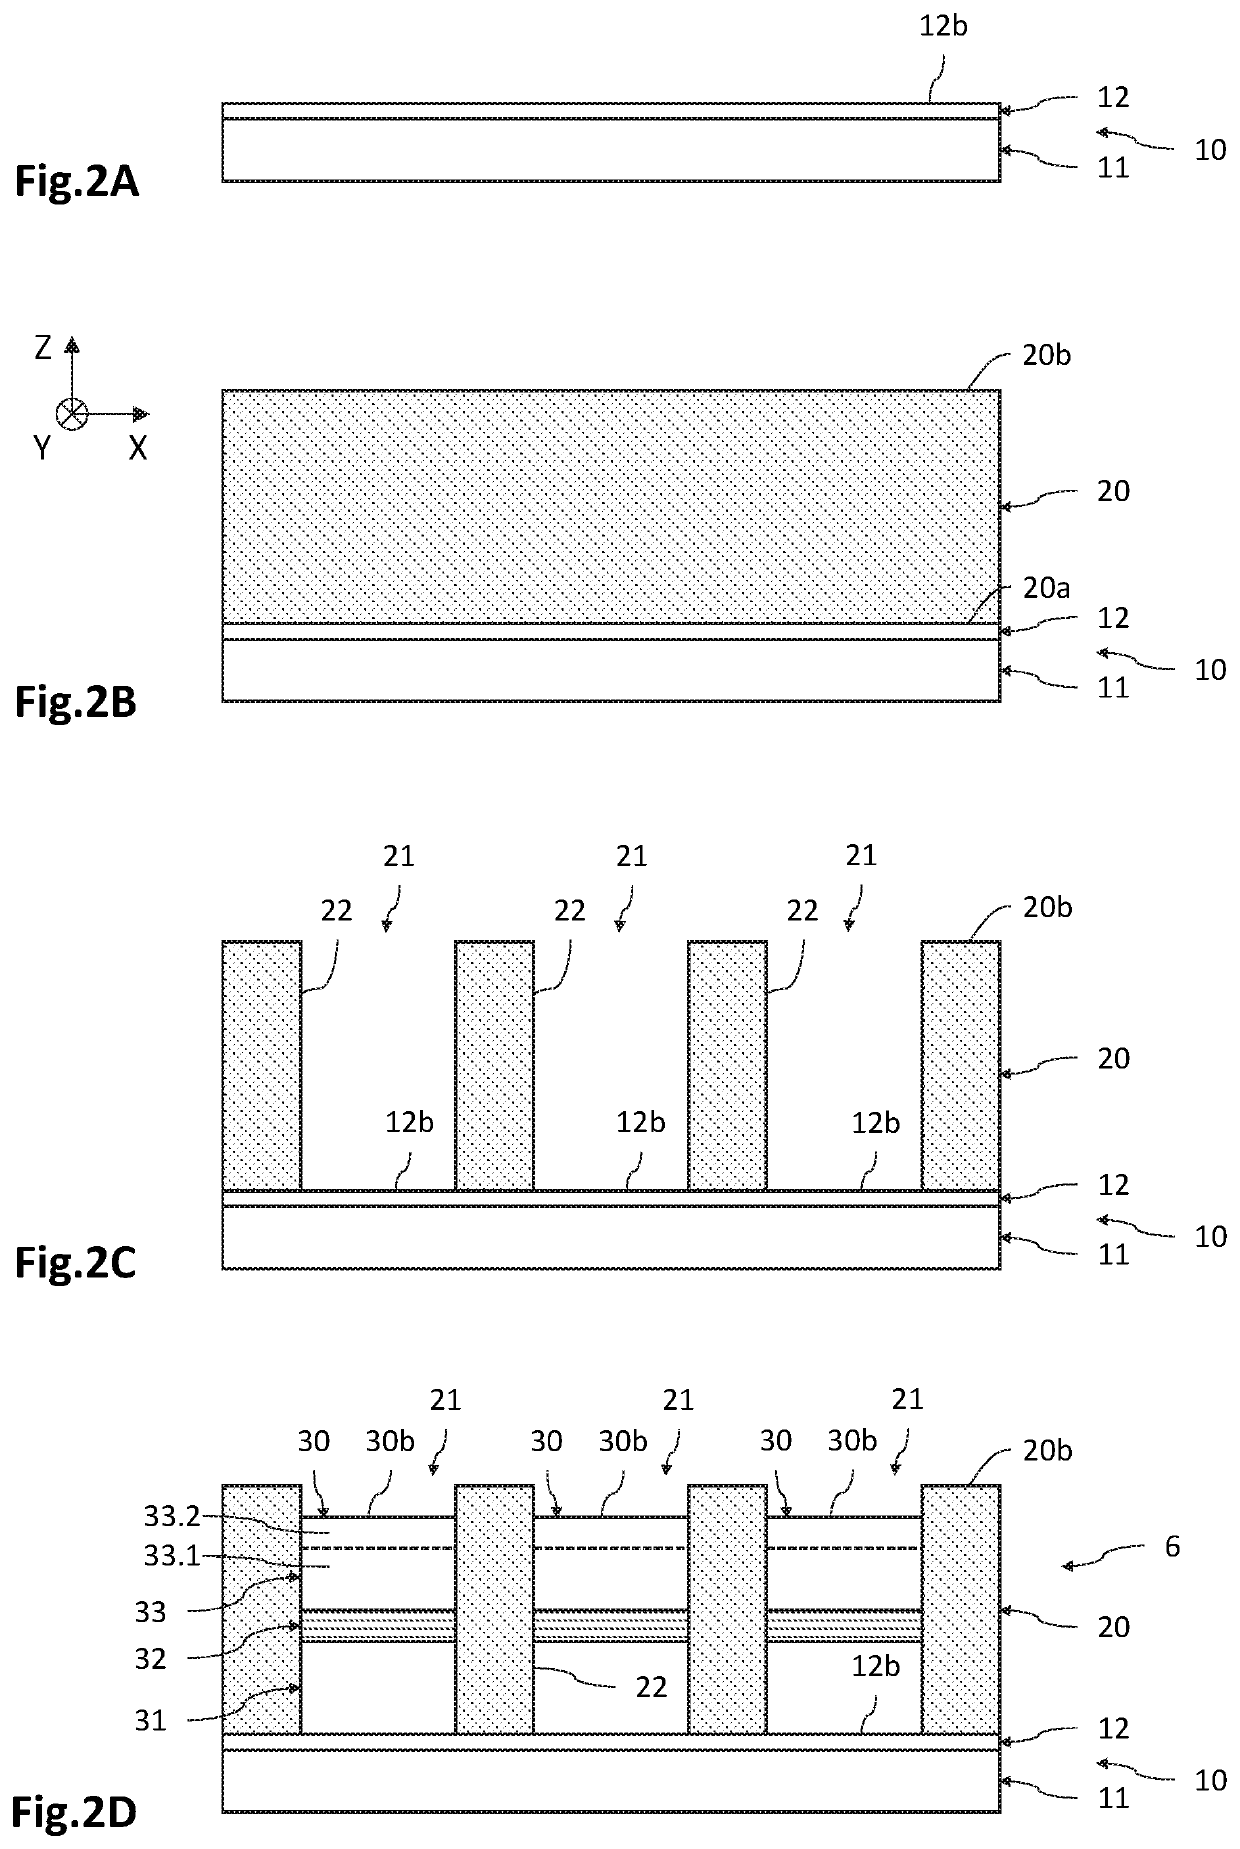 Process for manufacturing an optoelectronic device having a diode matrix